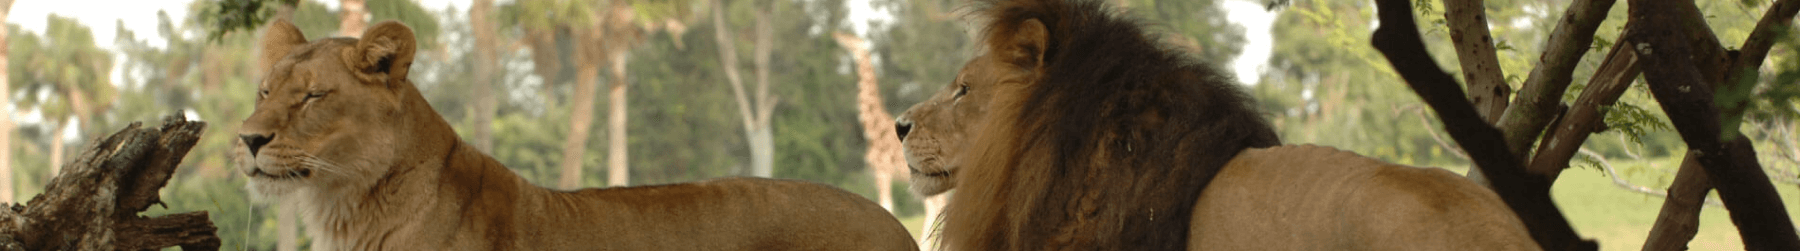 A male and female lion outside at Busch Gardens Tampa Bay, located in Florida